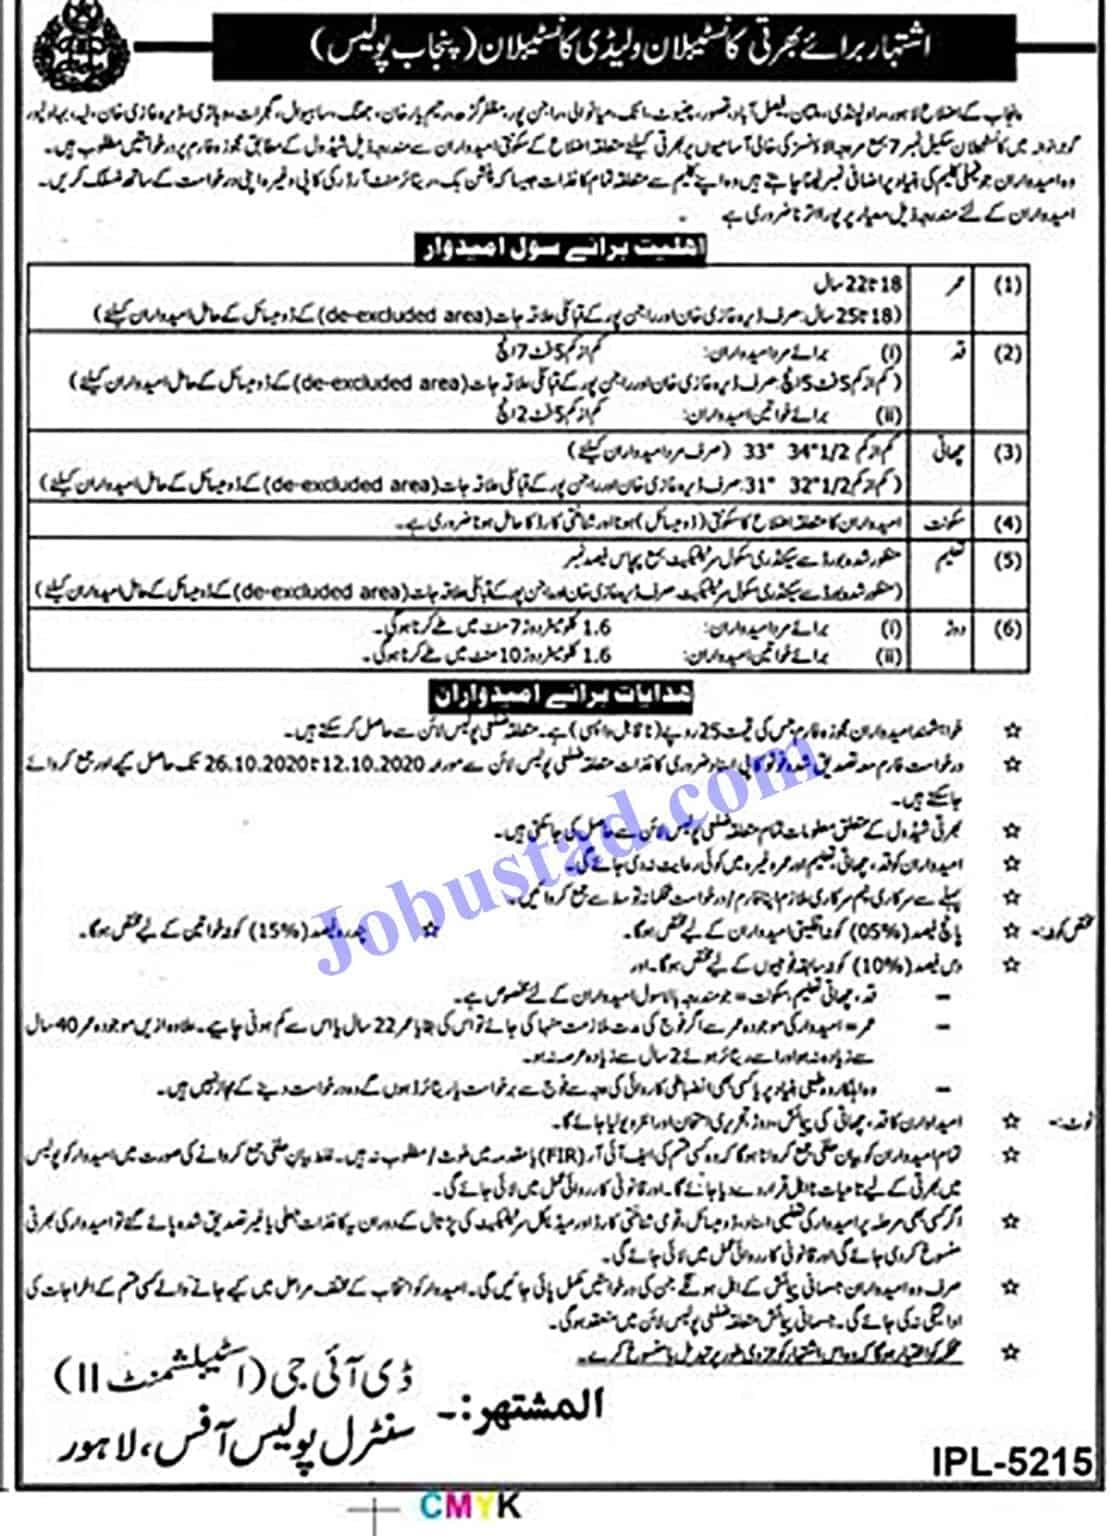 Punjab2BPolice2BConstable2Band2BLady2BConstable2BJobs2BOctober2B2020 Jobs in Punjab Police Constable and Lady Constable 2020